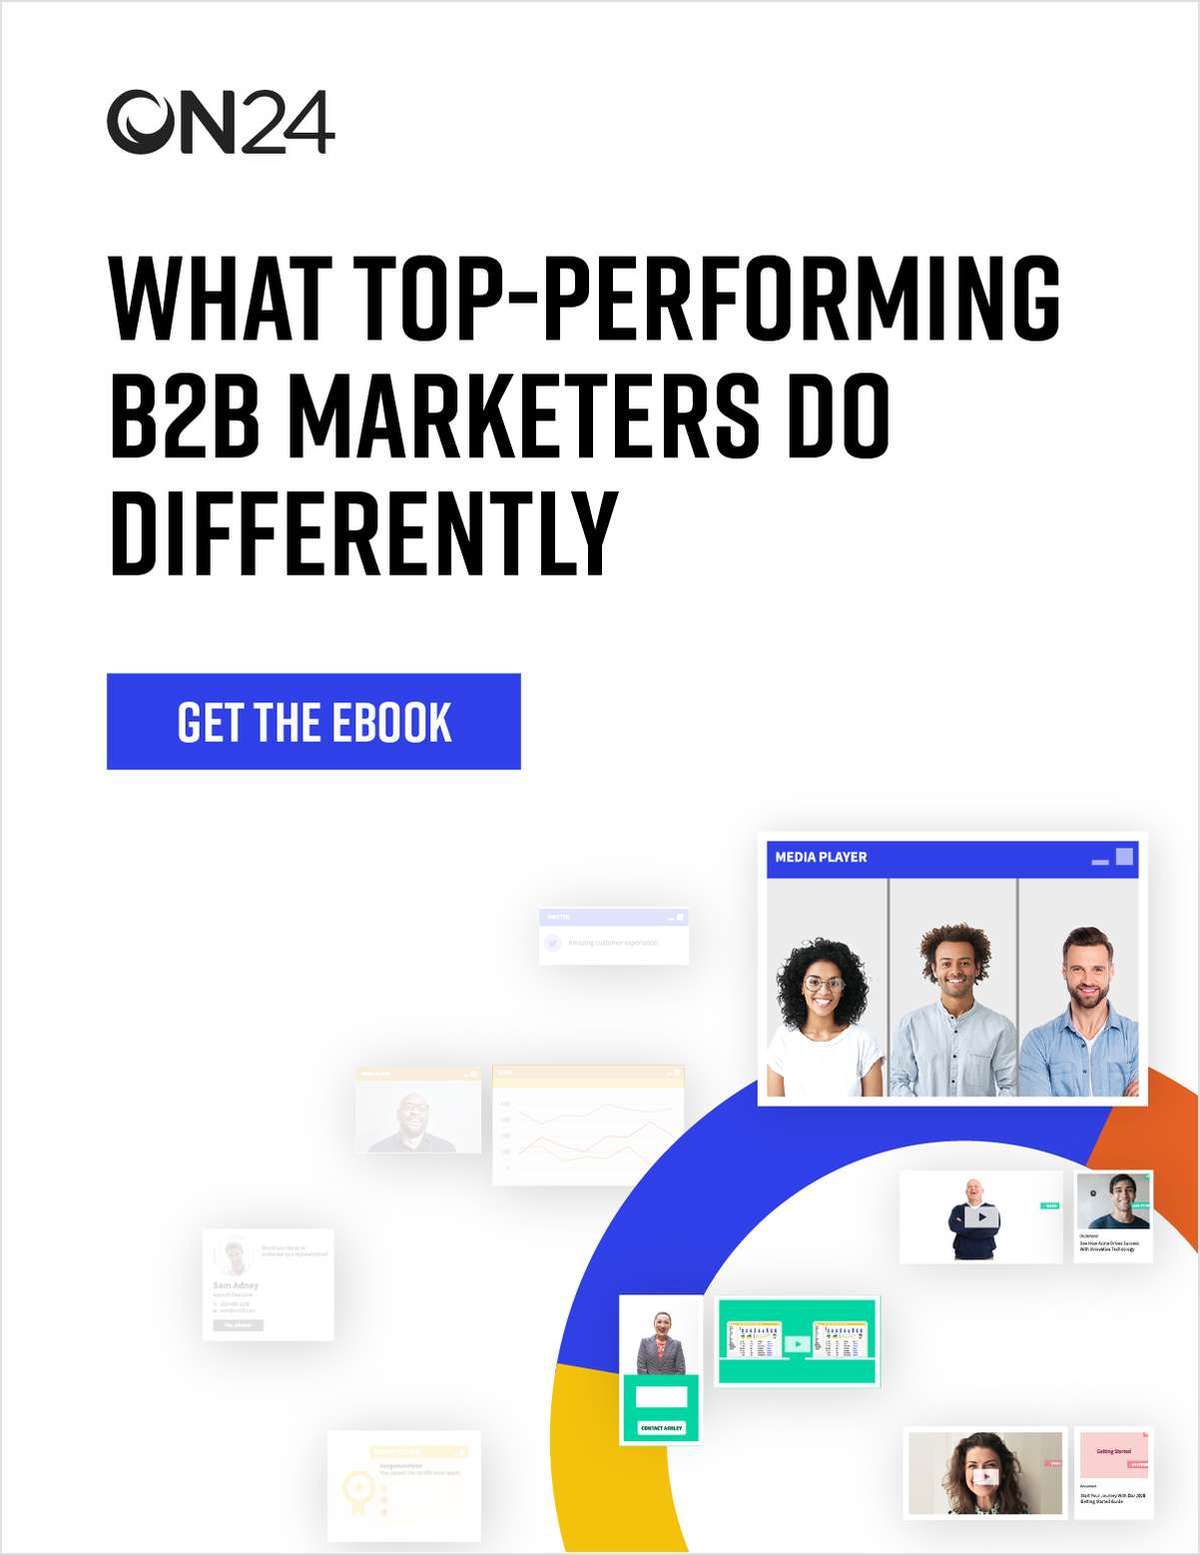 Transform Your Marketing: Learn What Top-Performing B2B Marketers Do Differently